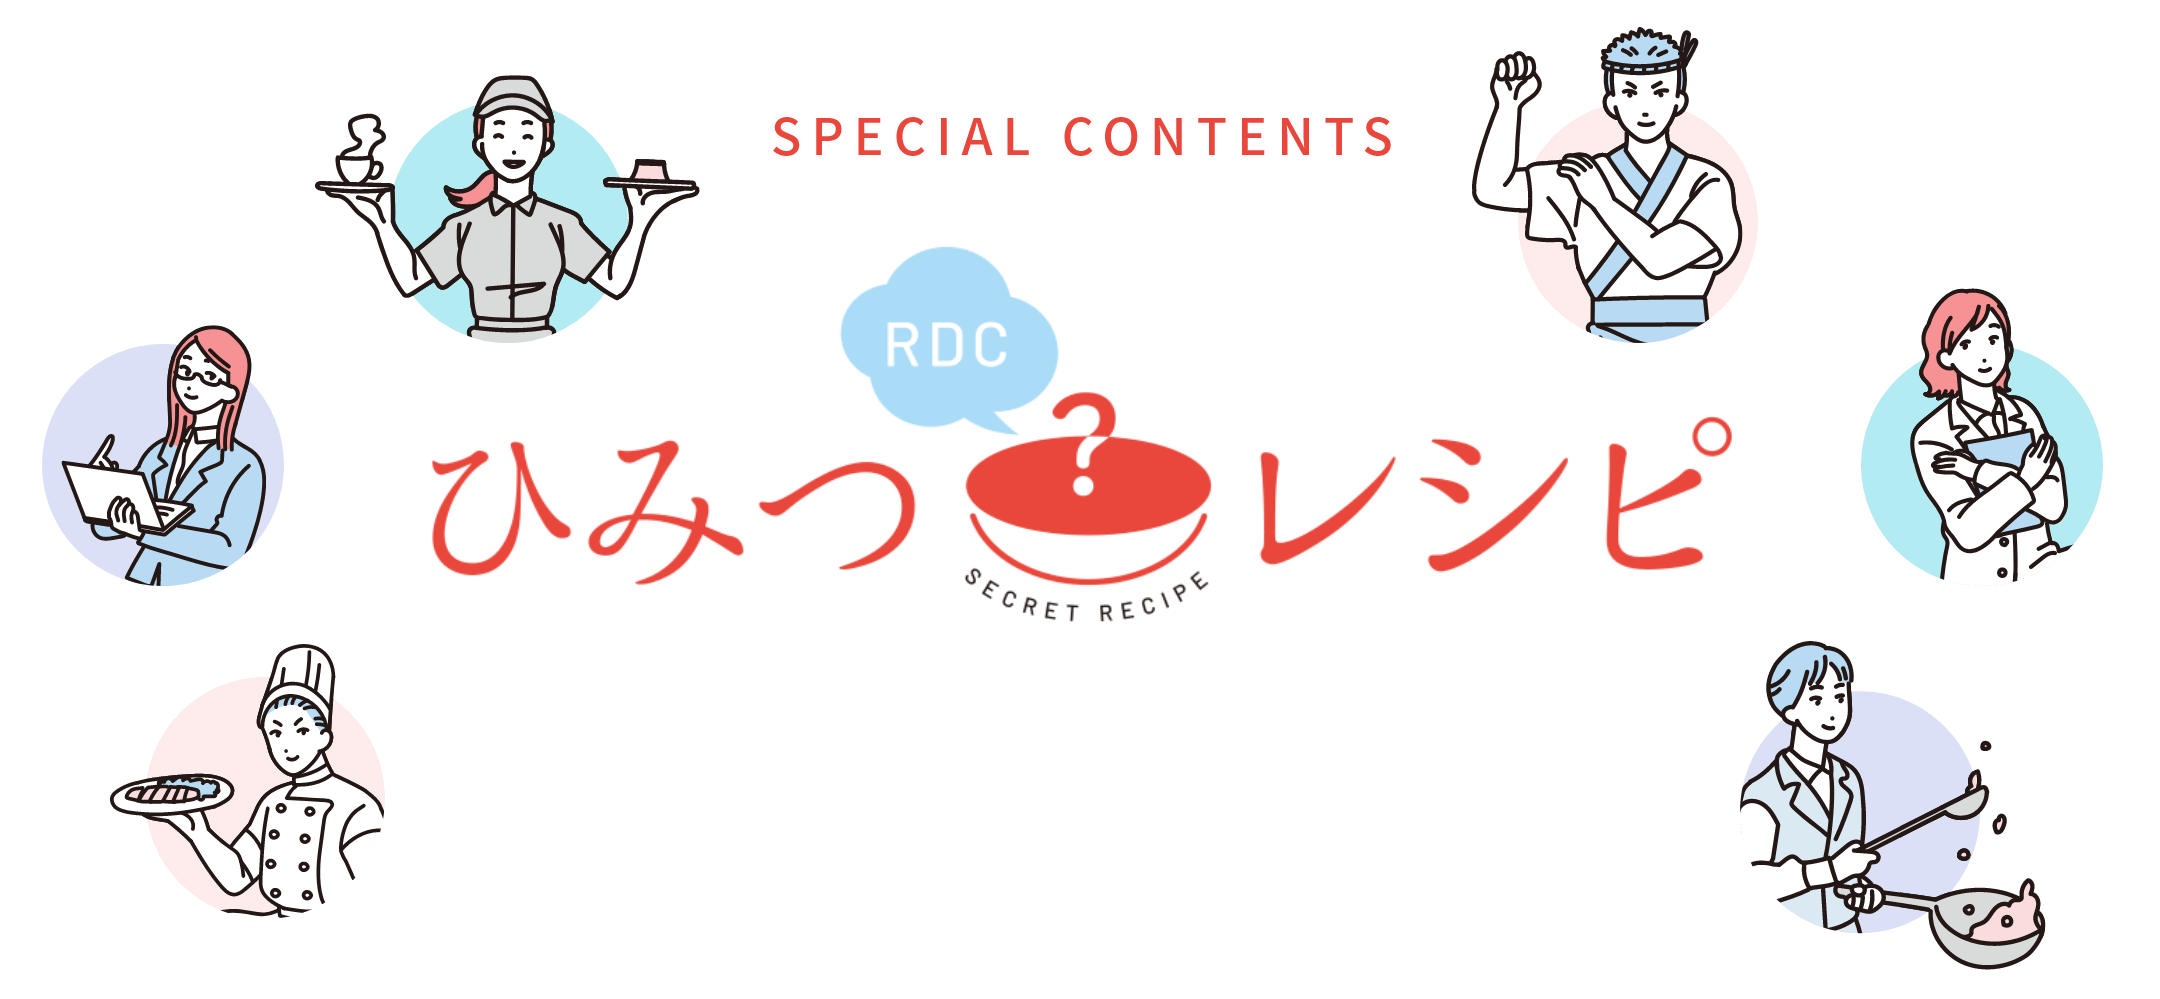 SPECIAL CONTENTS ひみつレシピ